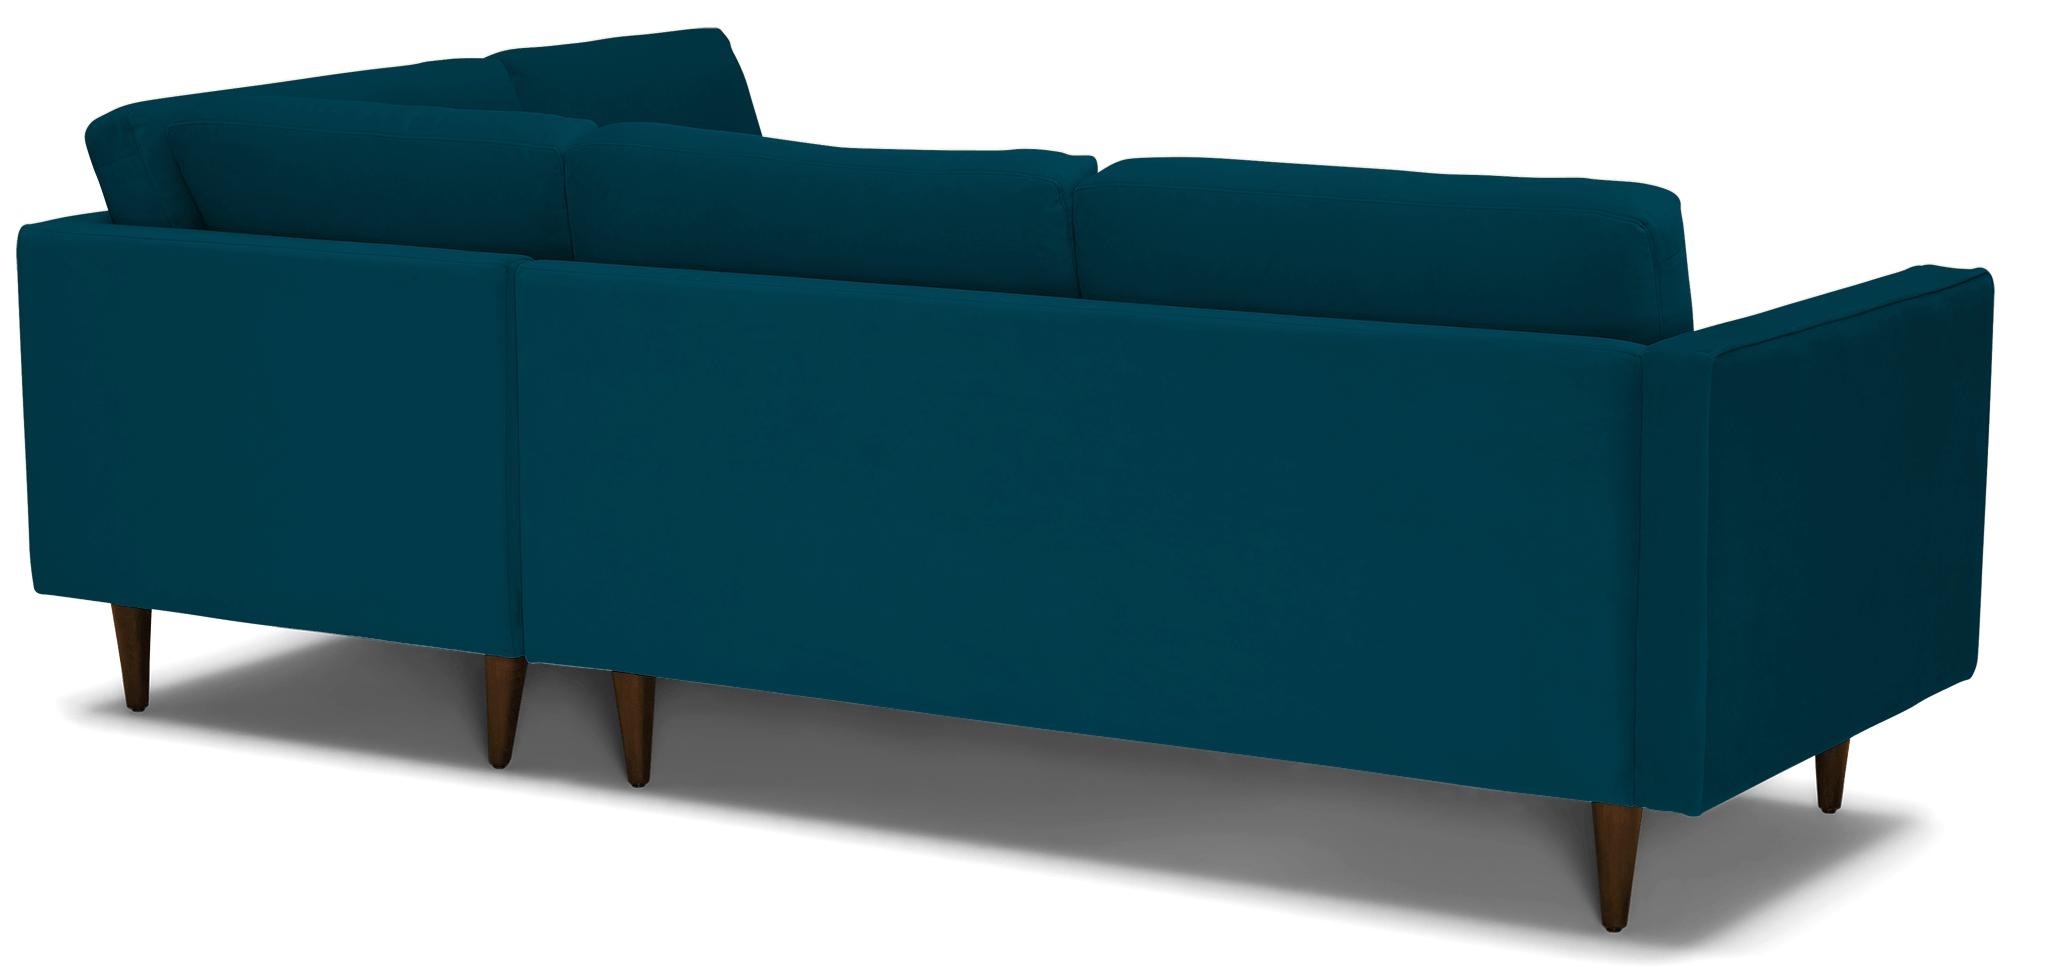 Blue Briar Mid Century Modern Sectional with Bumper - Key Largo Zenith Teal - Mocha - Right  - Image 3